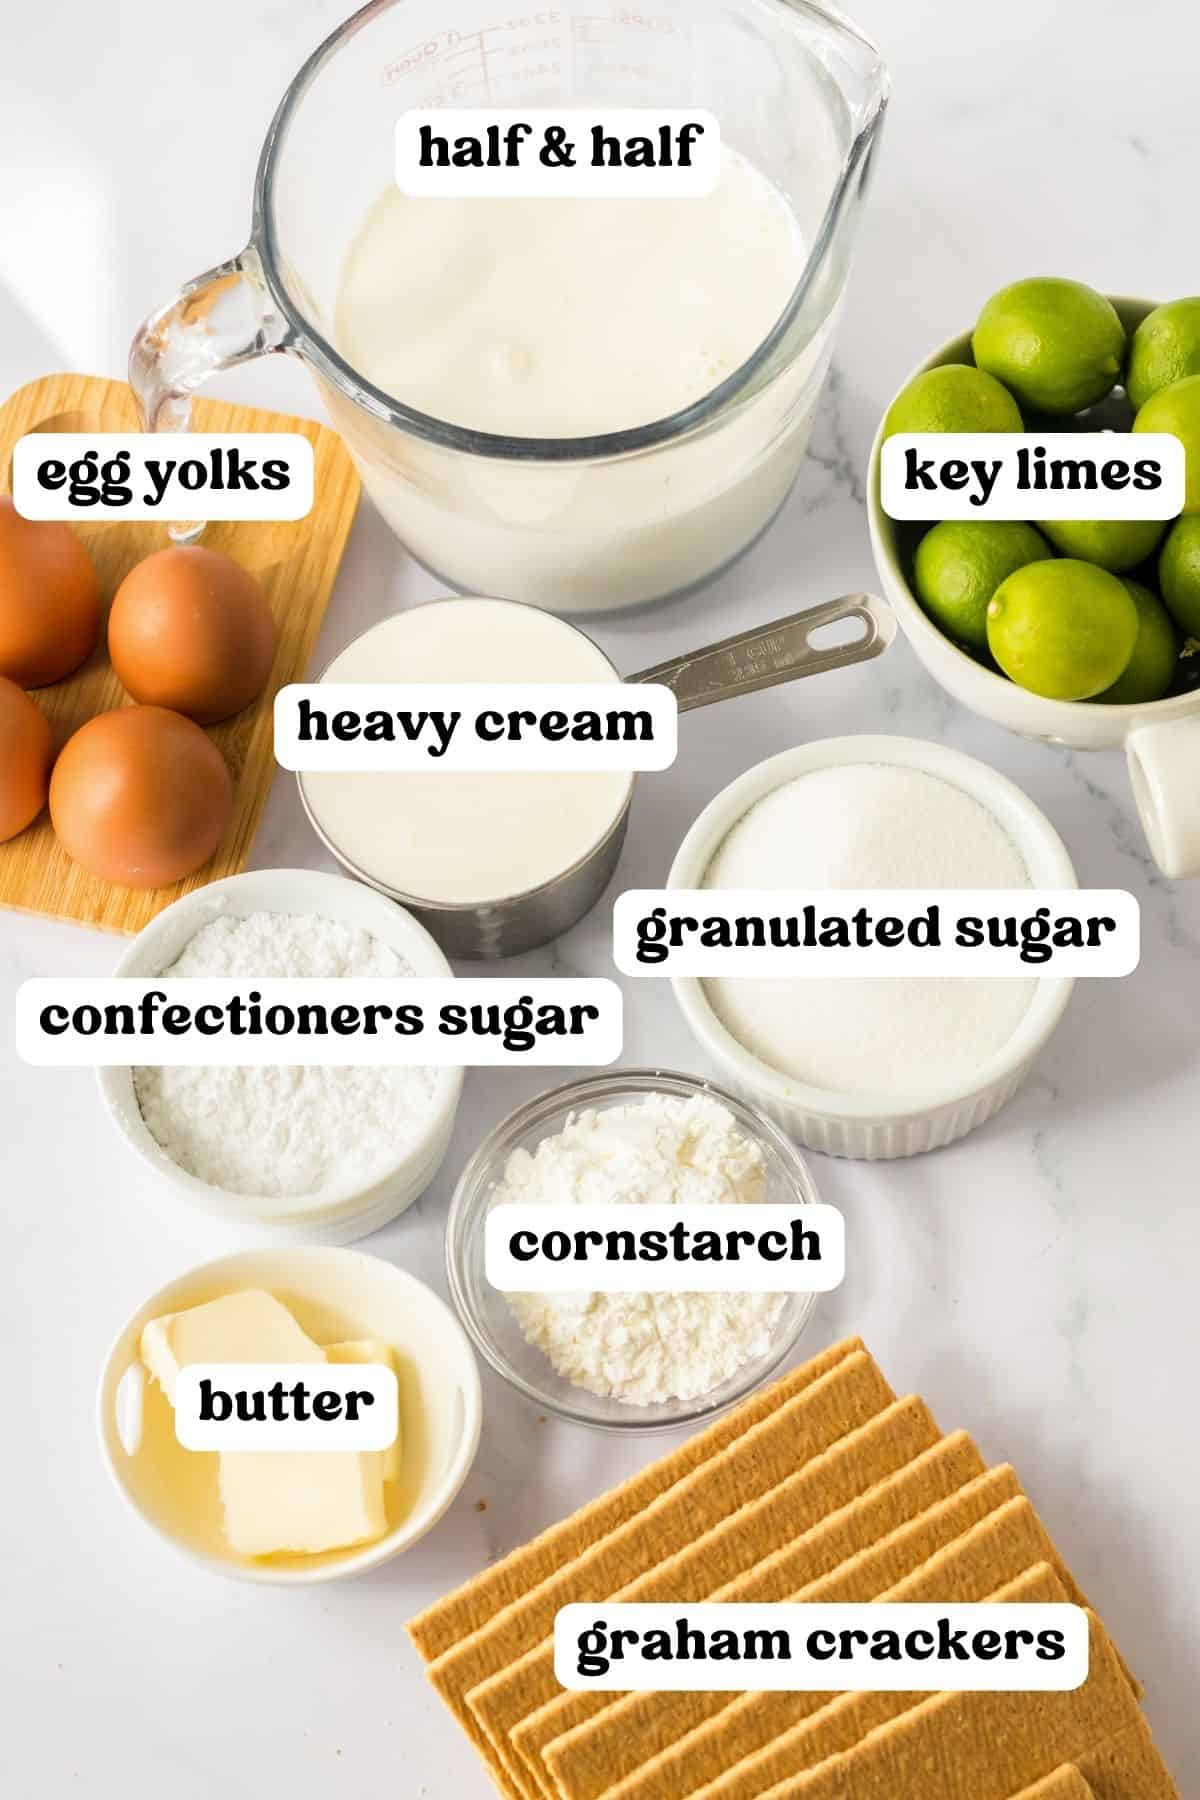 Ingredients for Key Lime Pudding Cake on coutertop.